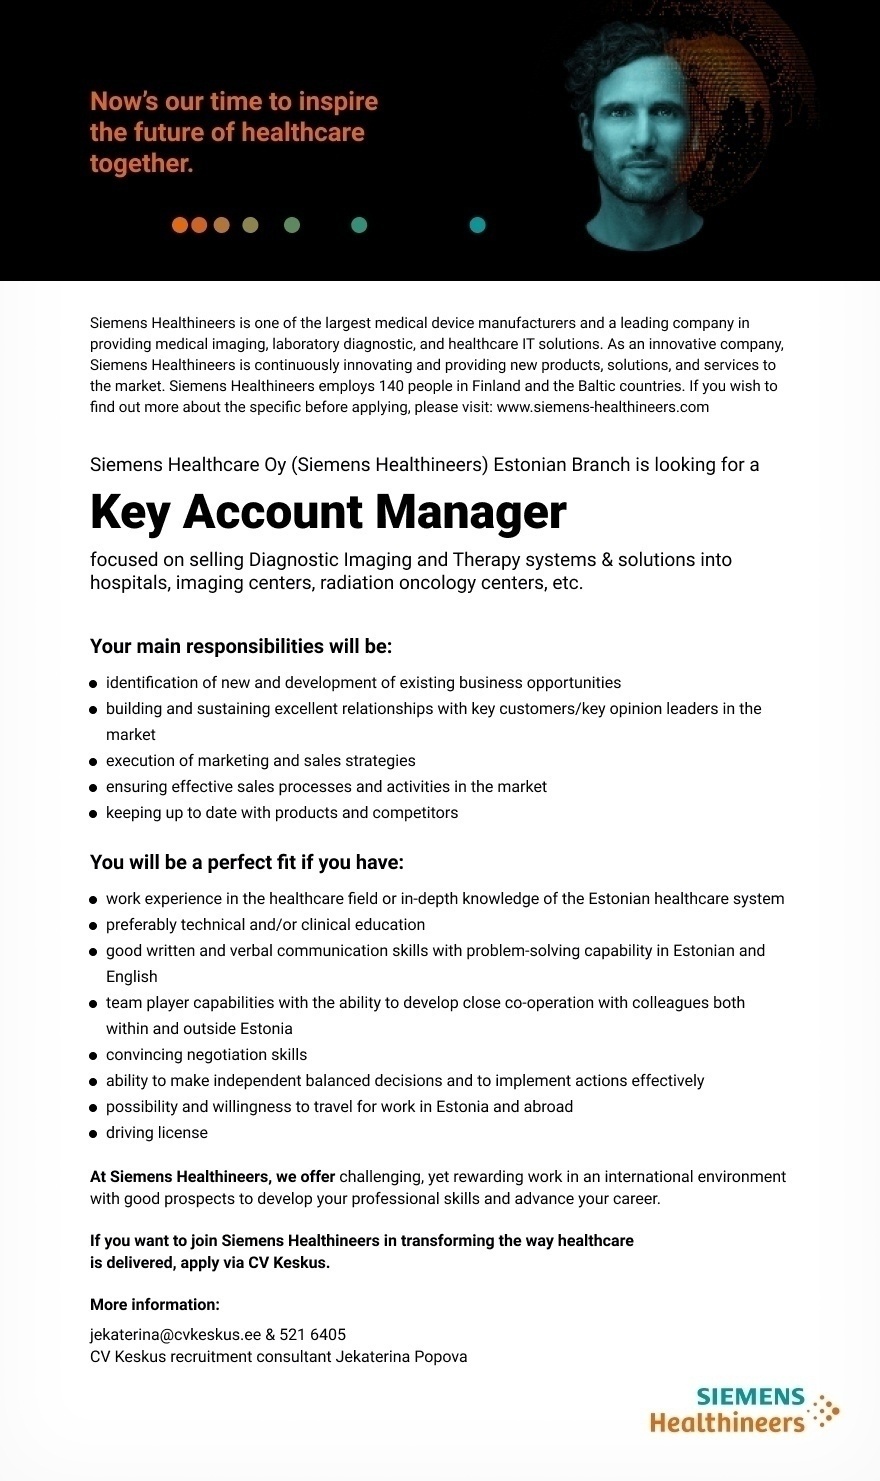 Siemens Healthcare Oy  Key Account Manager